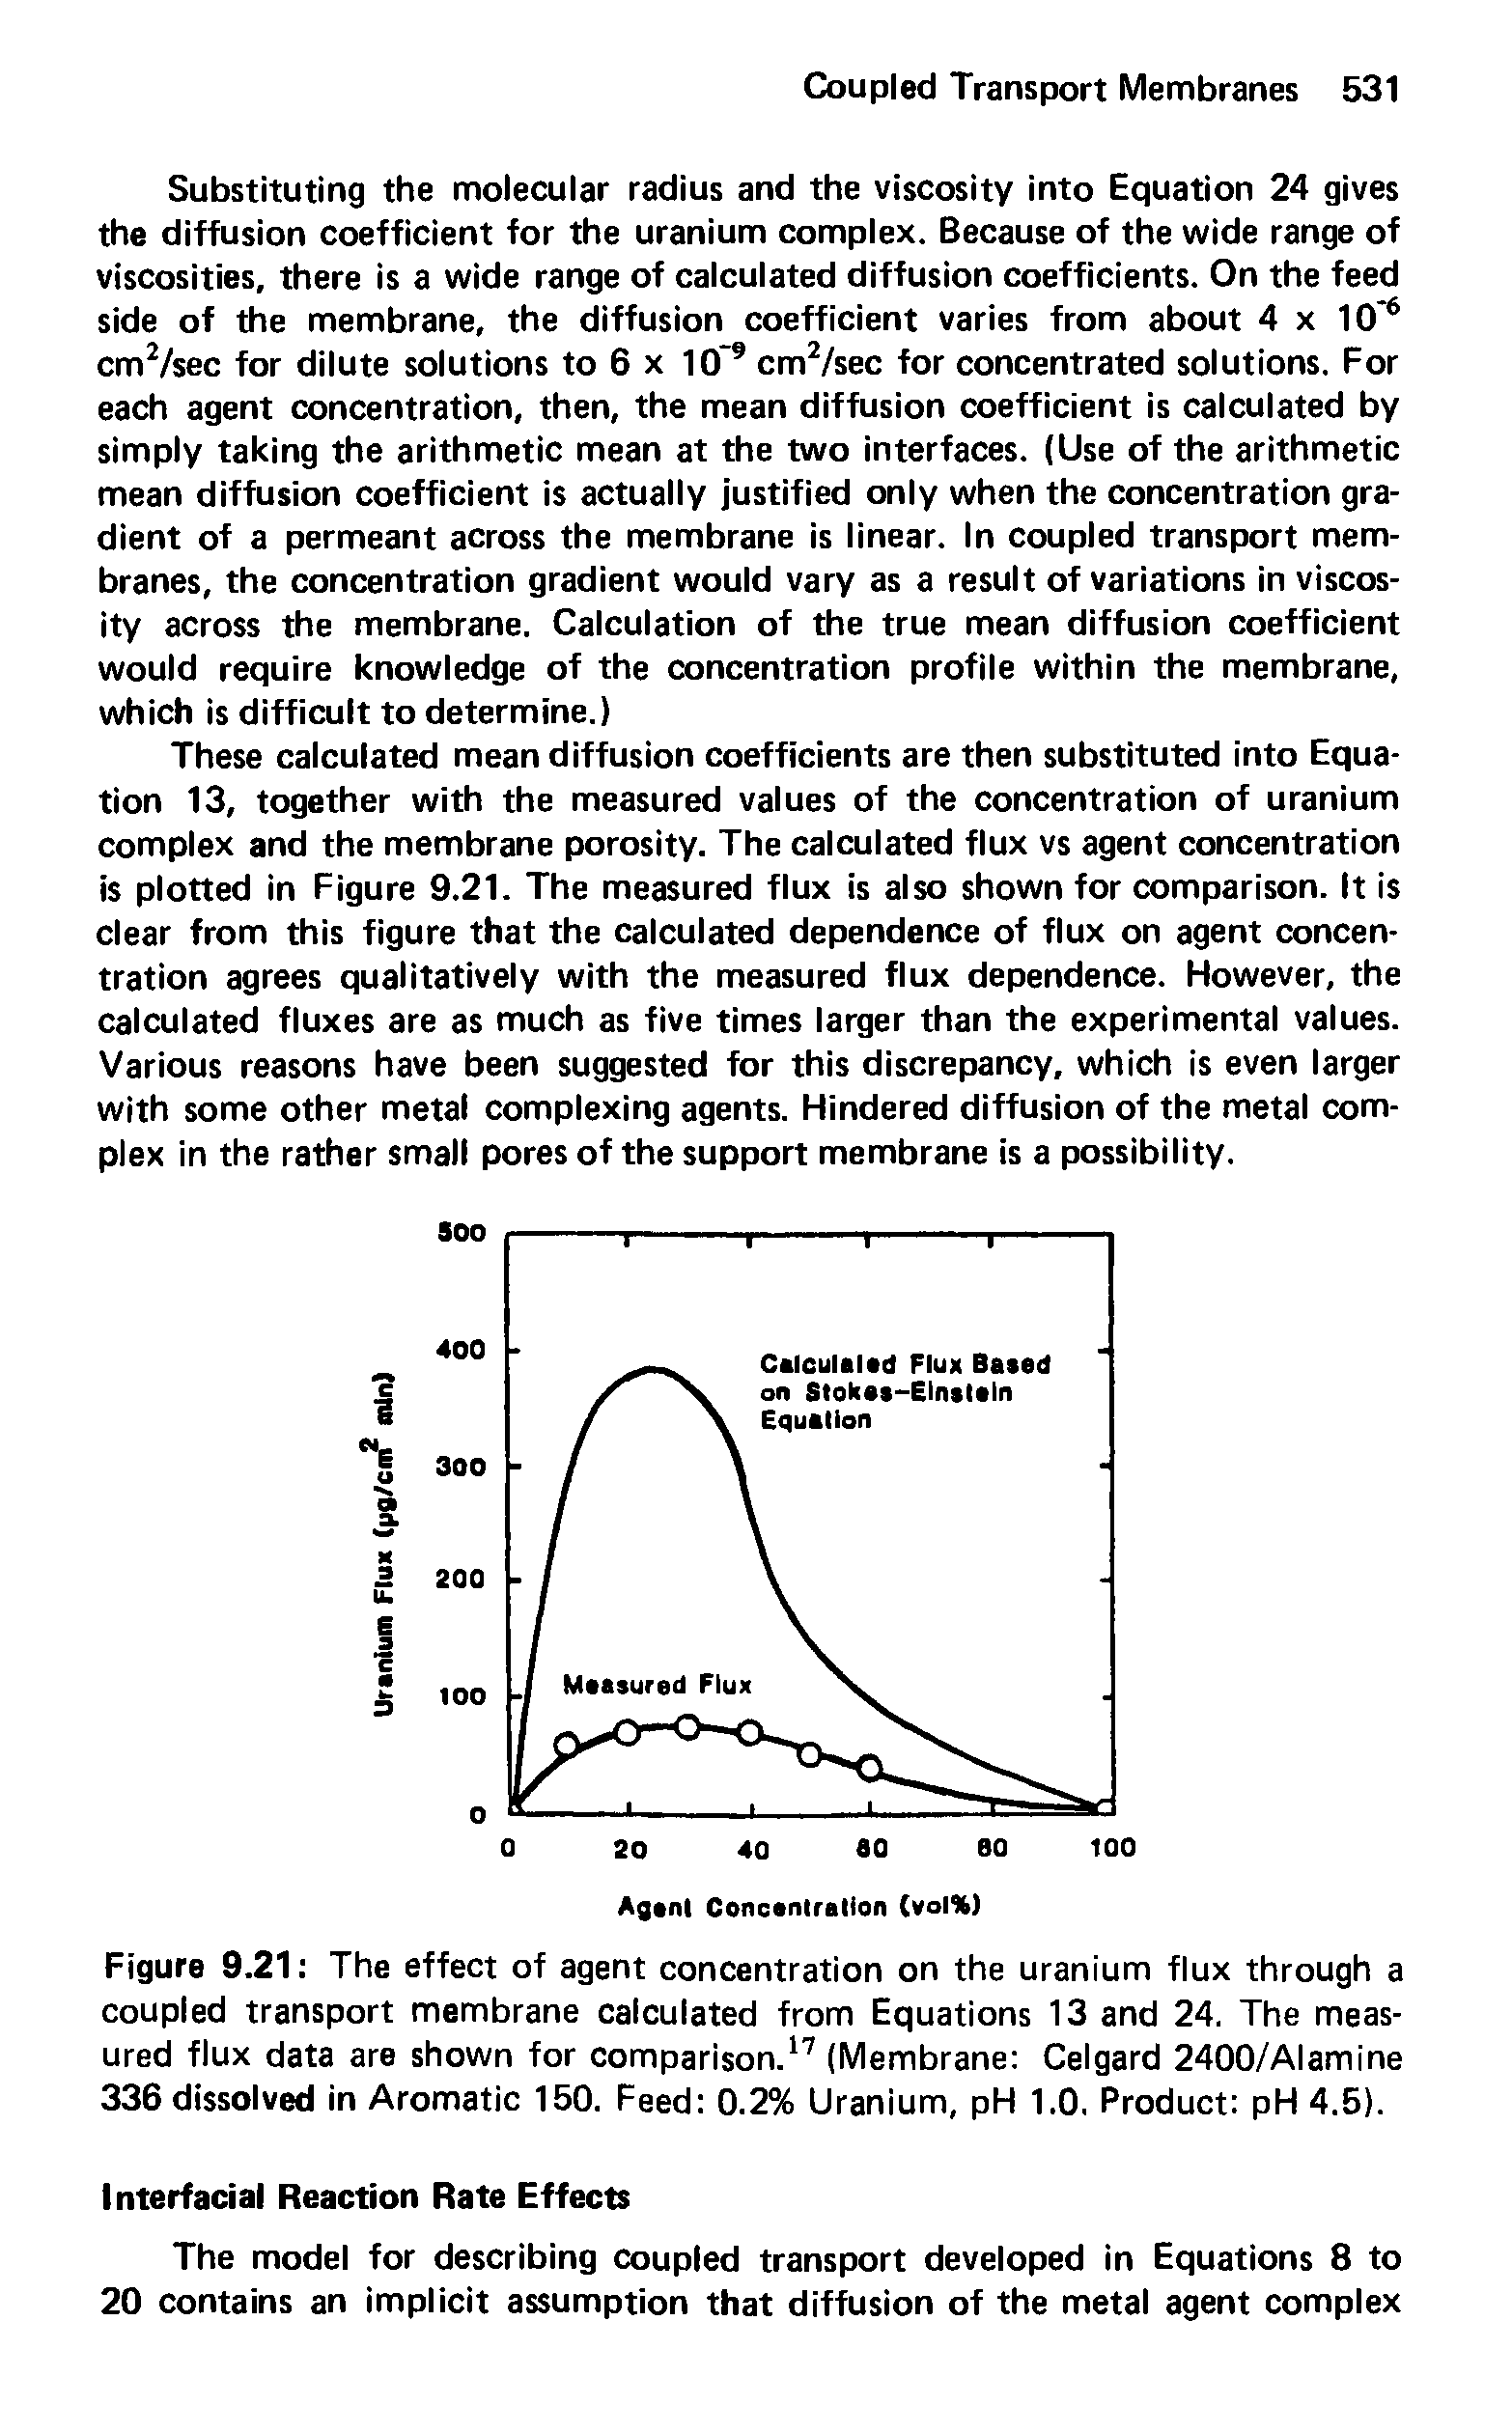 Figure 9.21 The effect of agent concentration on the uranium flux through a coupled transport membrane calculated from Equations 13 and 24. The measured flux data are shown for comparison.17 (Membrane Celgard 2400/Alamine 336 dissolved in Aromatic 150. Feed 0.2% Uranium, pH 1.0. Product pH 4.5).